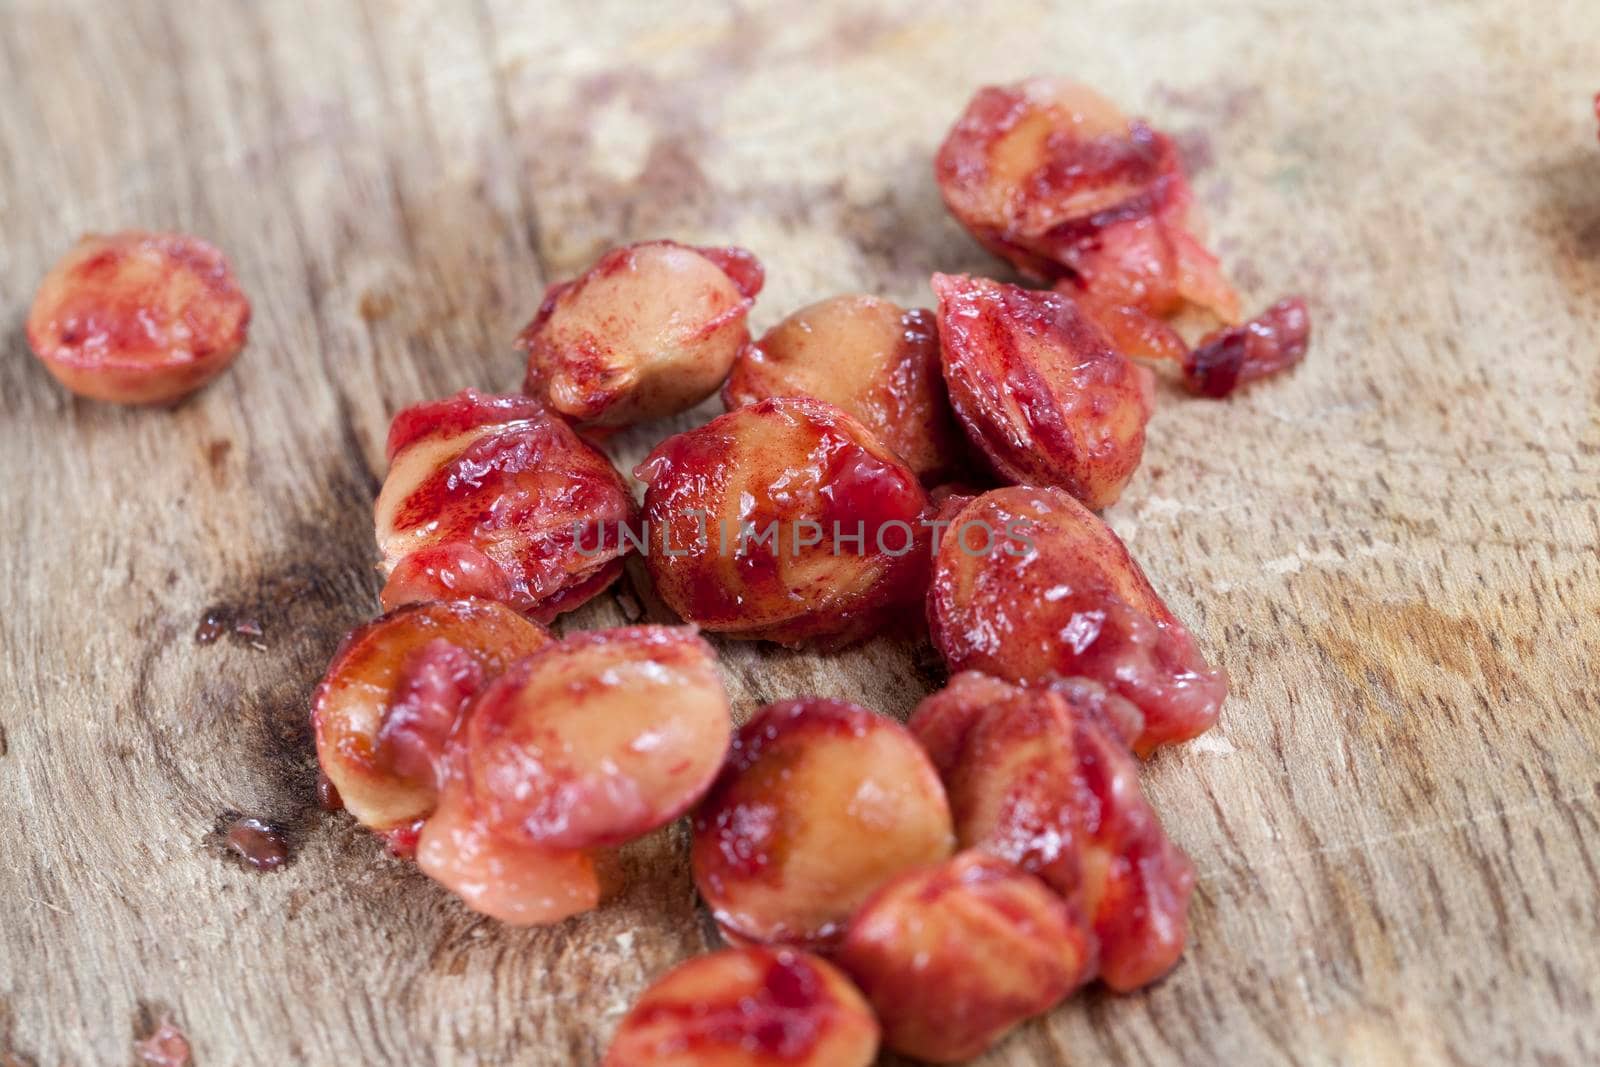 A few solid bone from a red cherry lying on a wooden board. On the bones there are the remains of the juicy pulp of mature cherry. Photo close-up of eaten berries